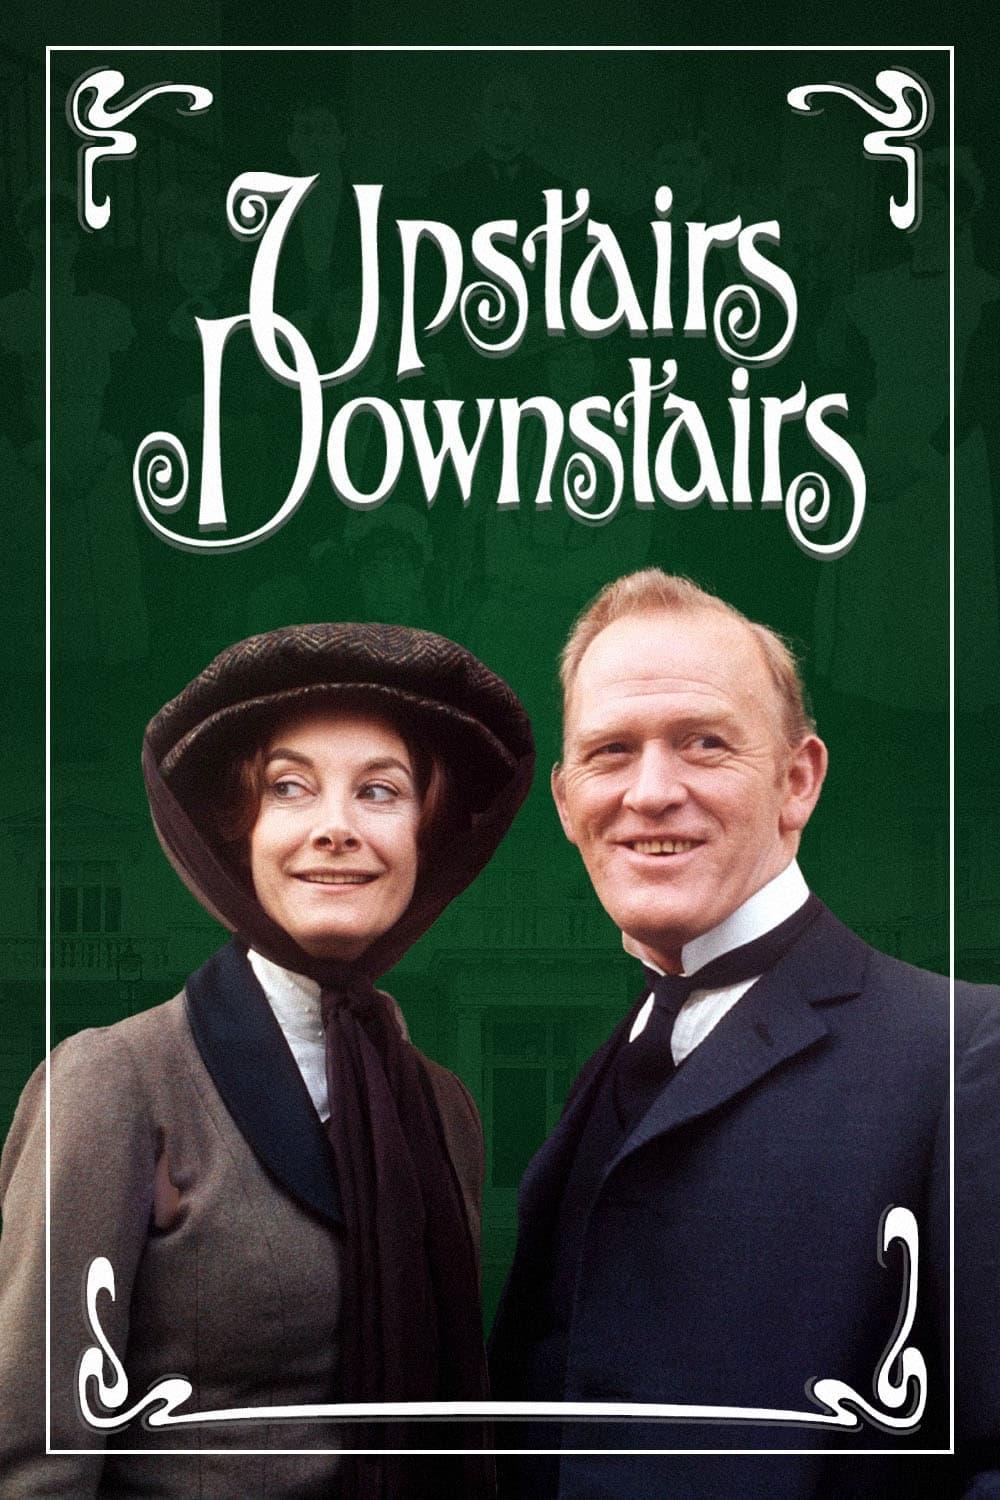 Upstairs, Downstairs poster